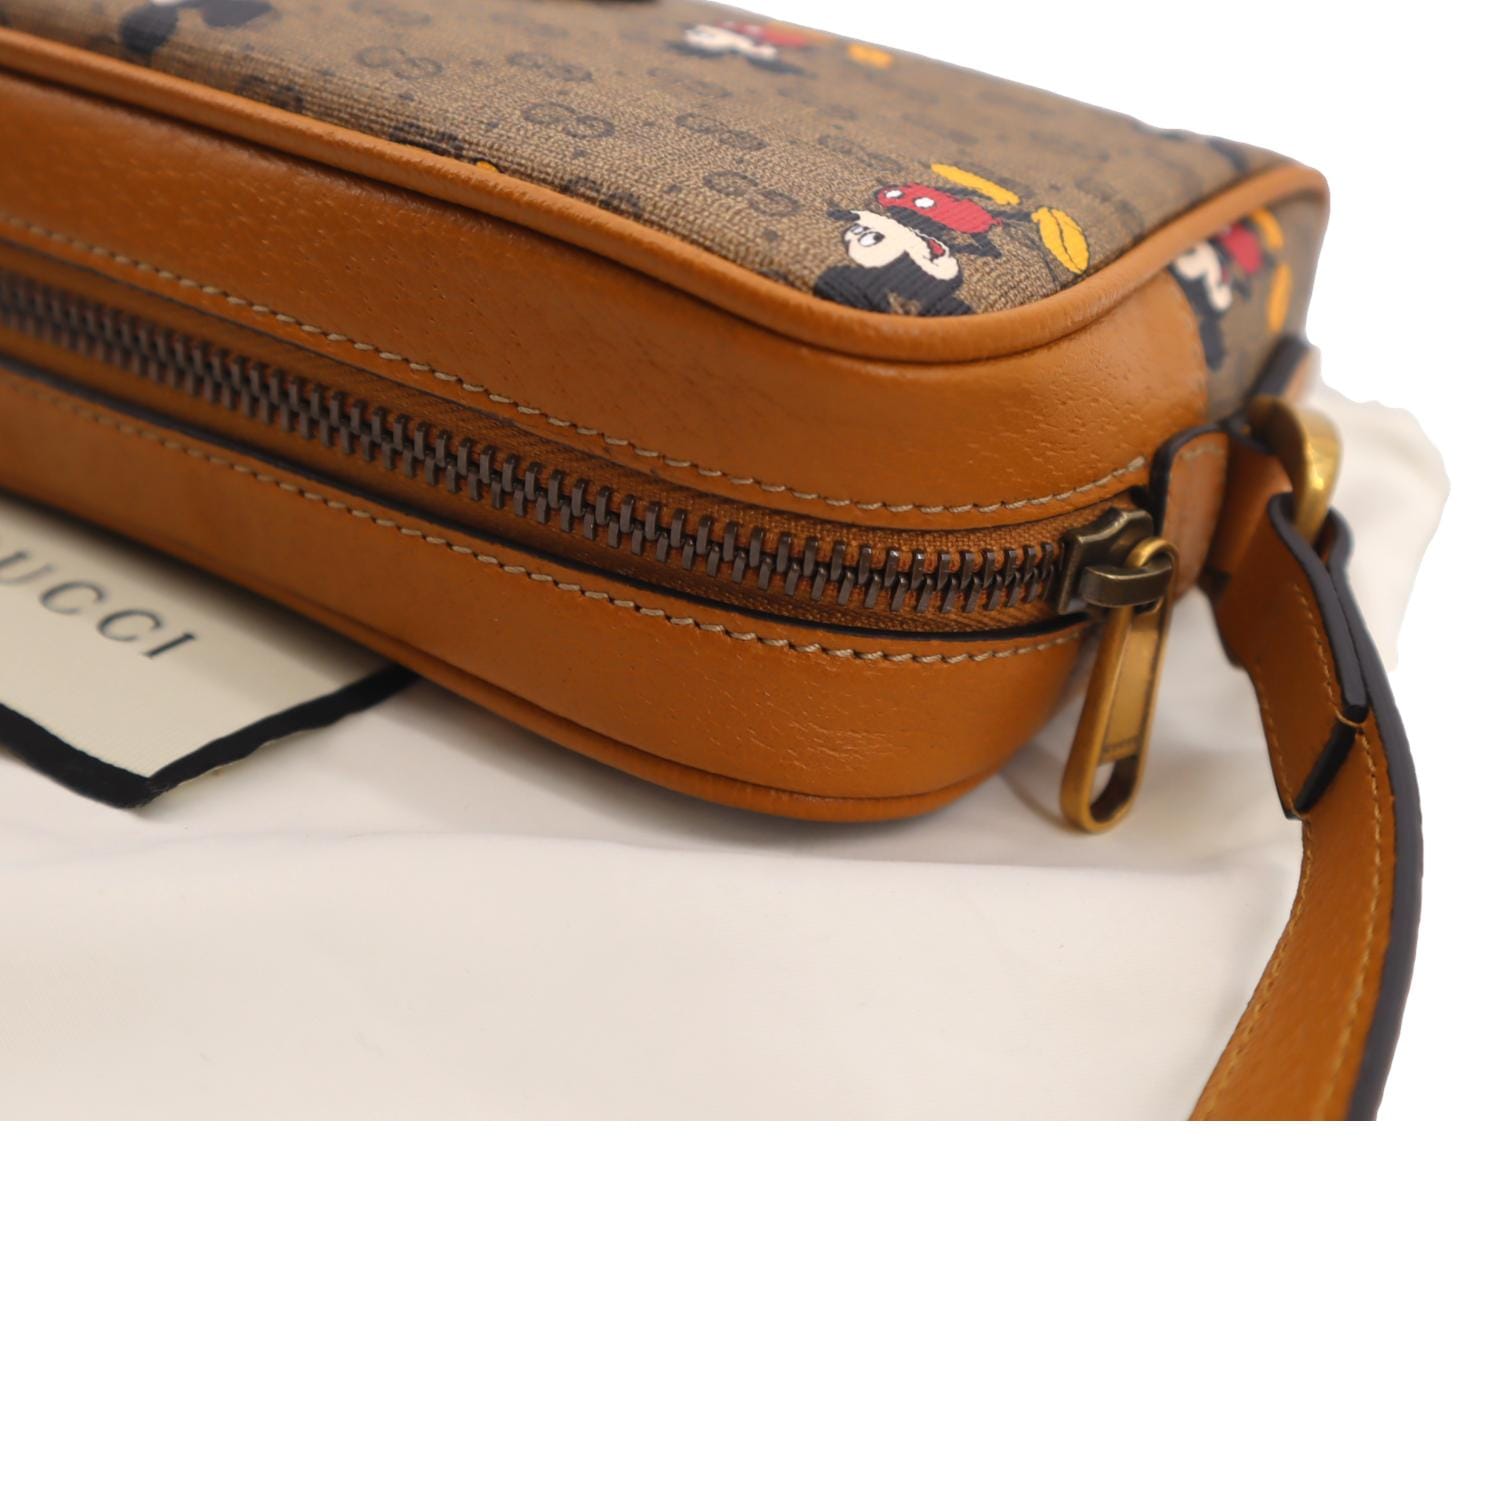 GUCCI x DISNEY Mickey Mouse Print Canvas Leather Saddle Shoulder